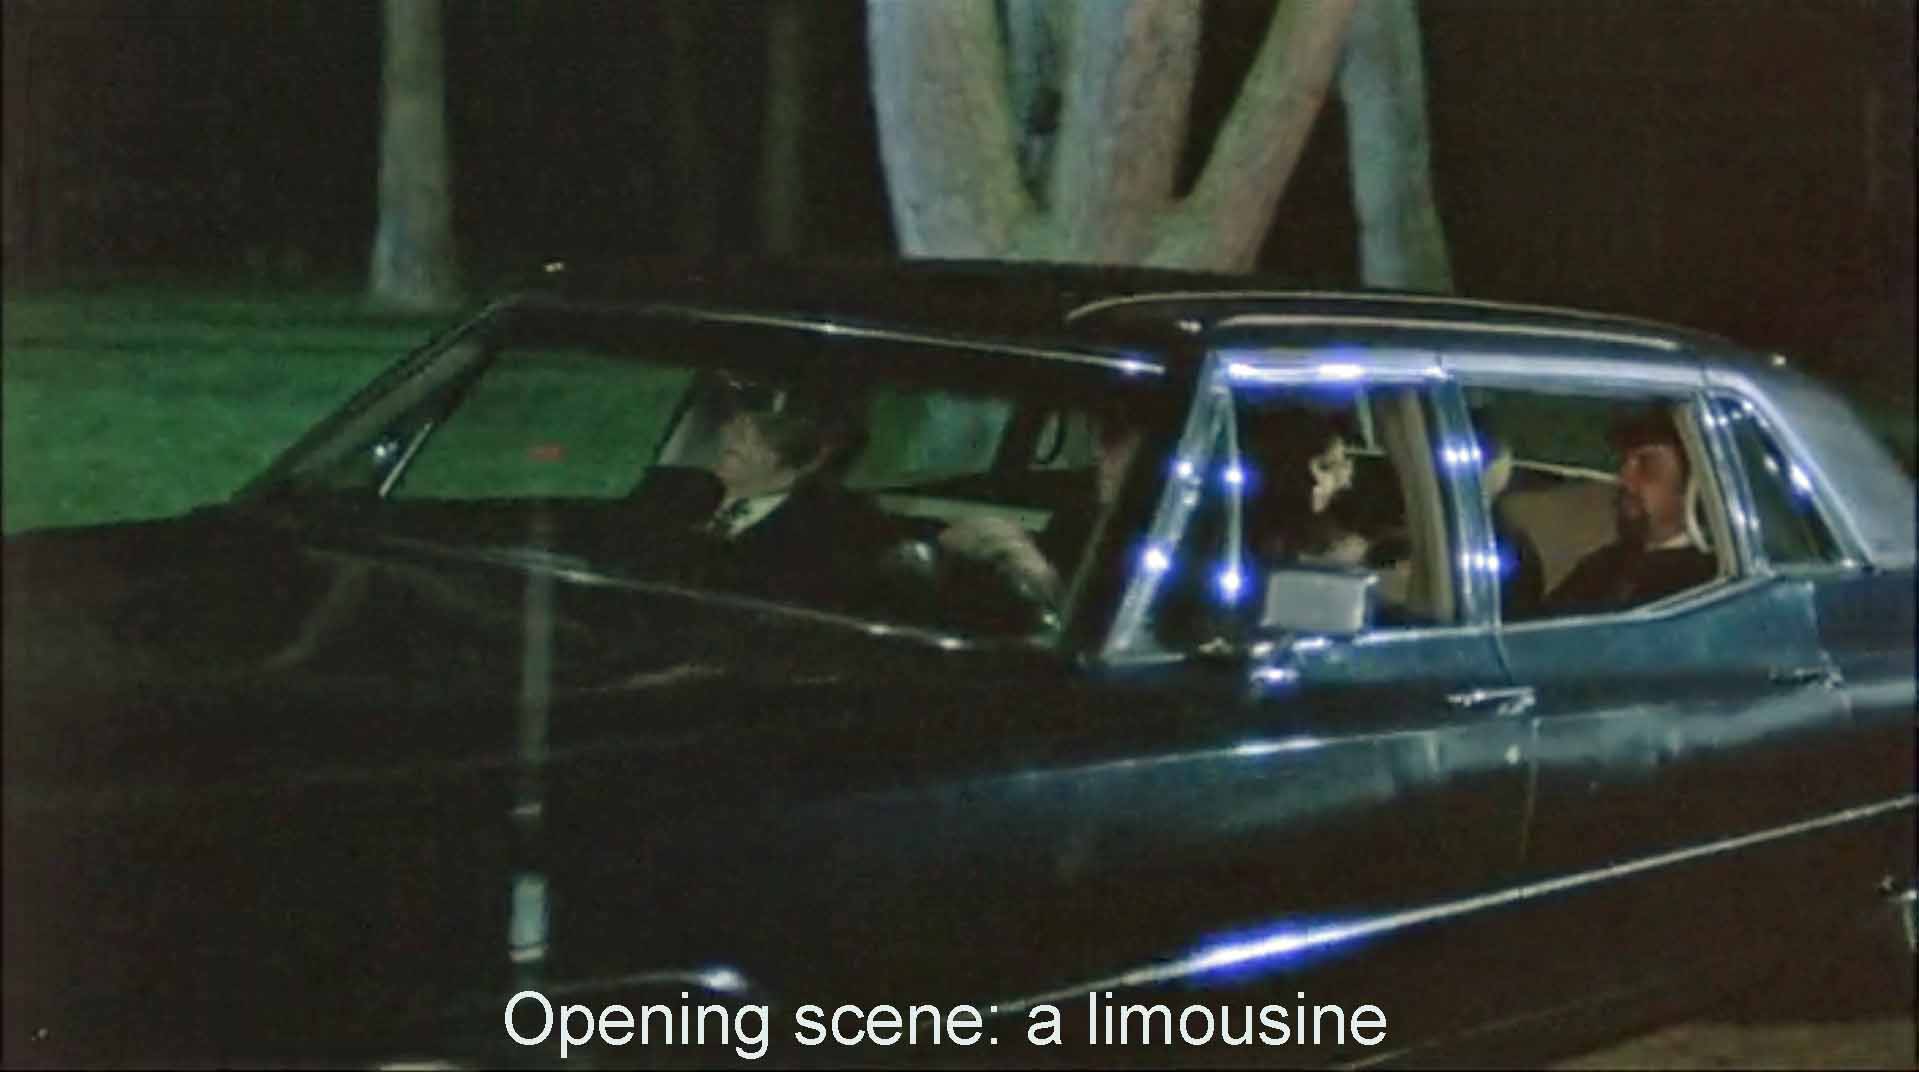 Opening scene: a limousine